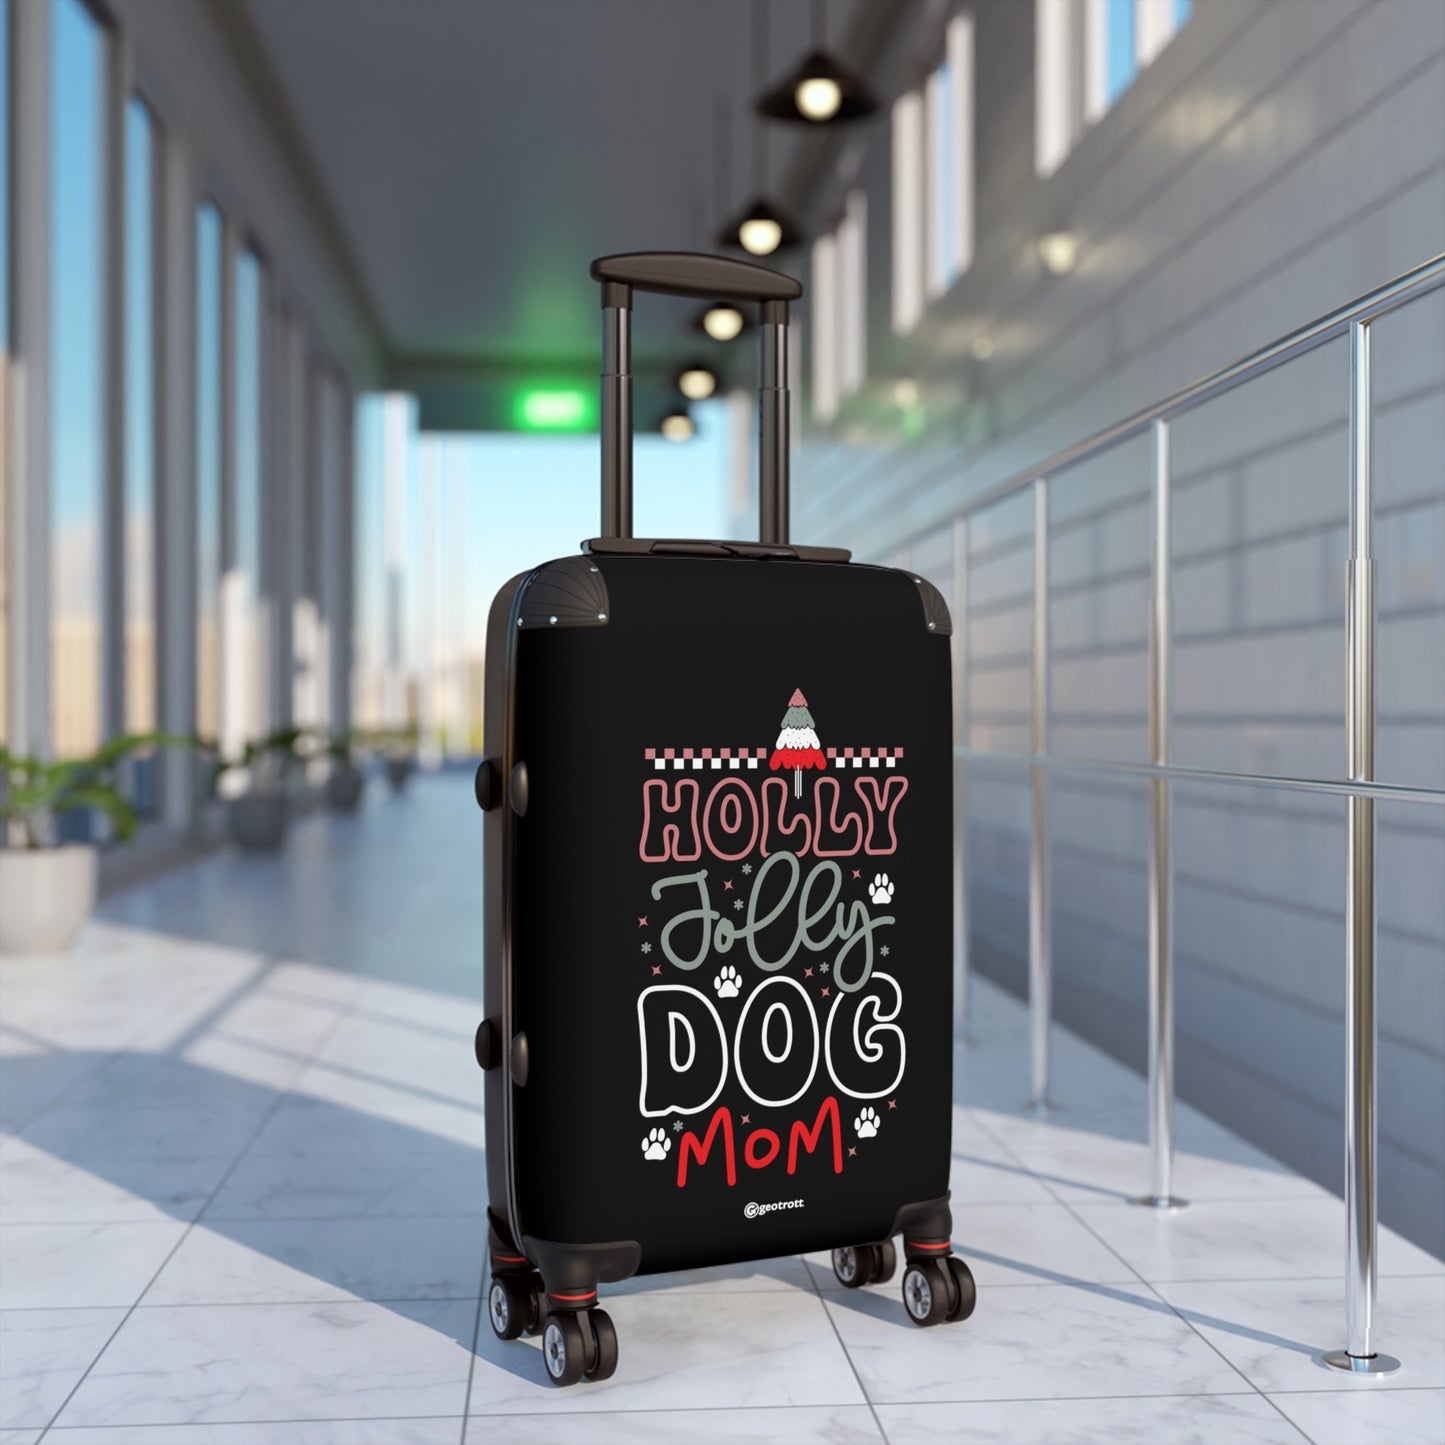 Funny Inspirational Holly Jolly Dog Mom Luggage Bag Rolling Suitcase Travel Accessories